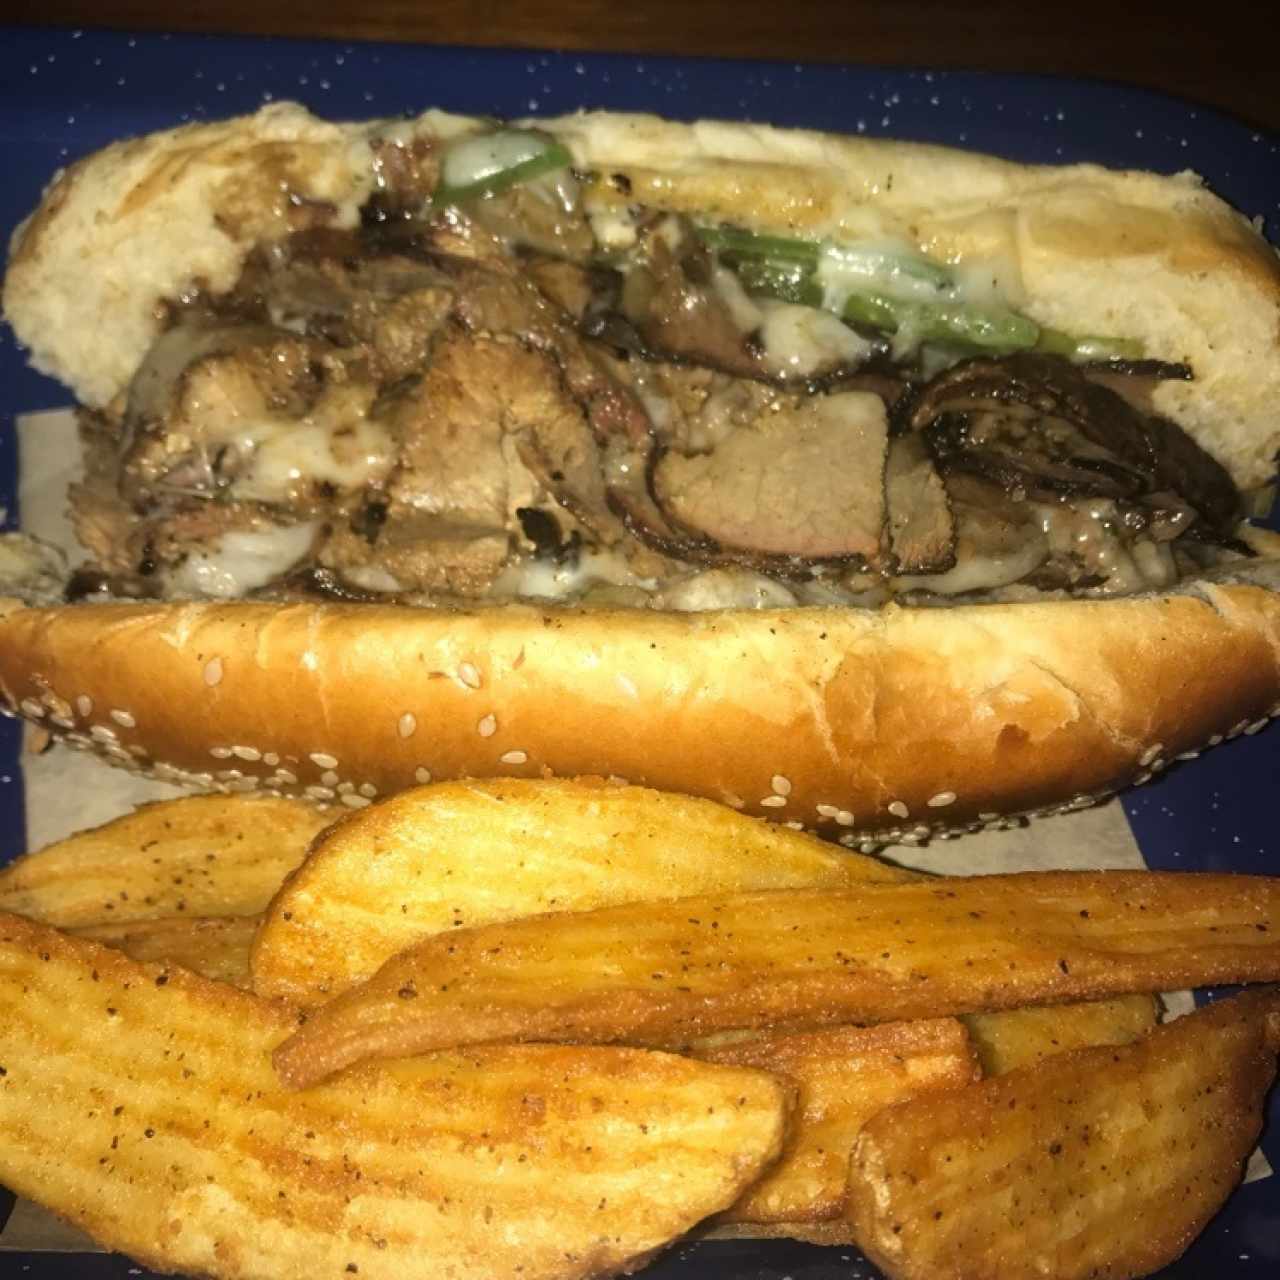 Cheese philly steak